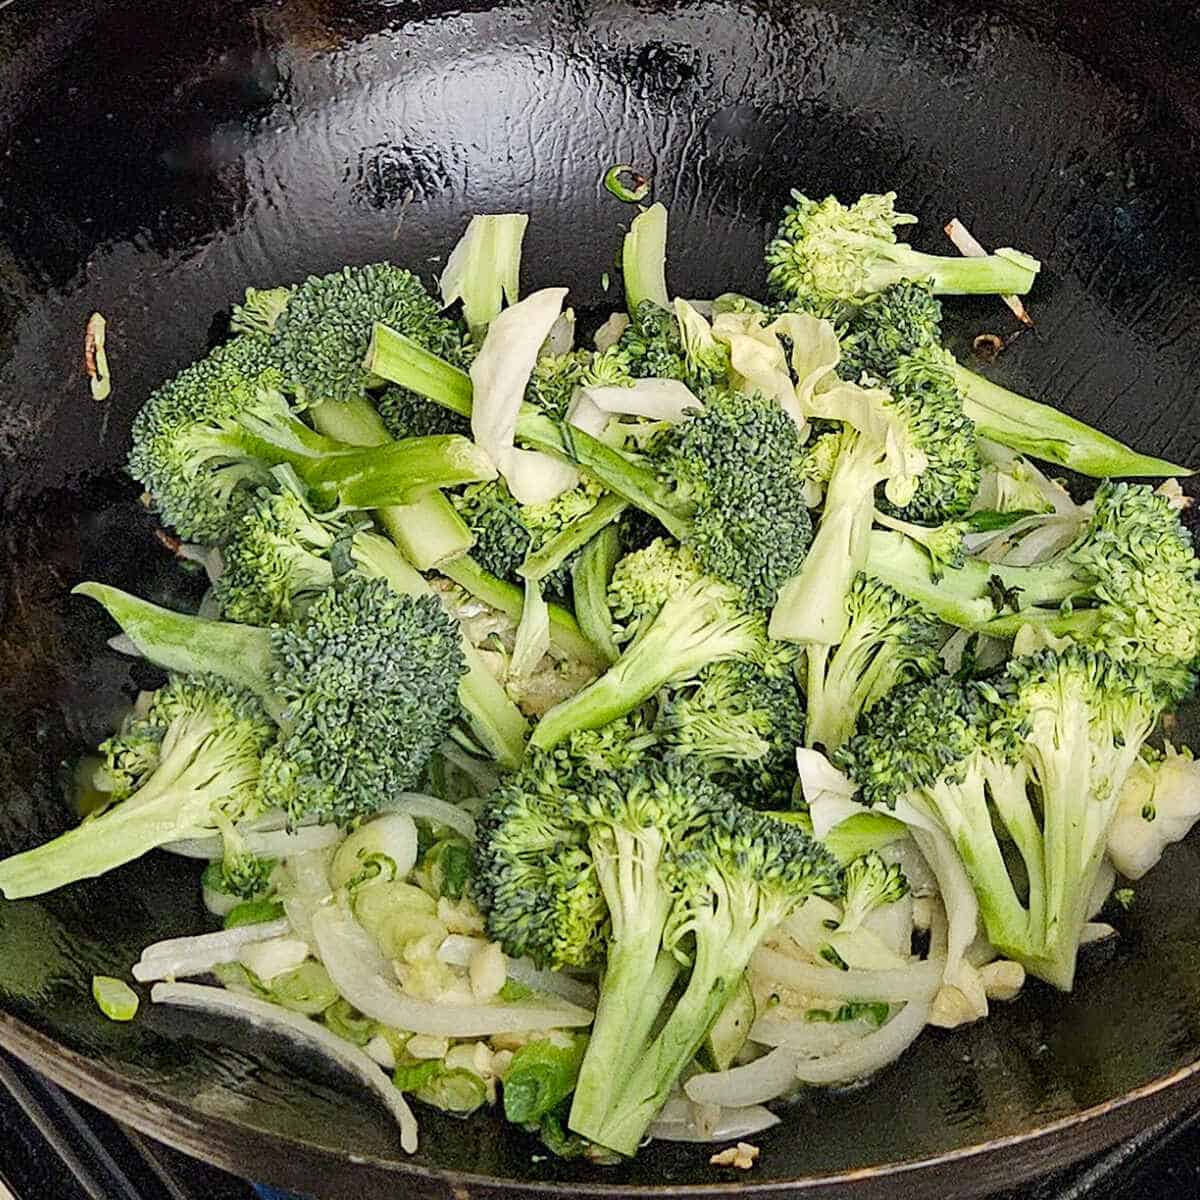 cooking the broccoli in the wok for the easy Asian vegetable stir fry rice noodles recipe